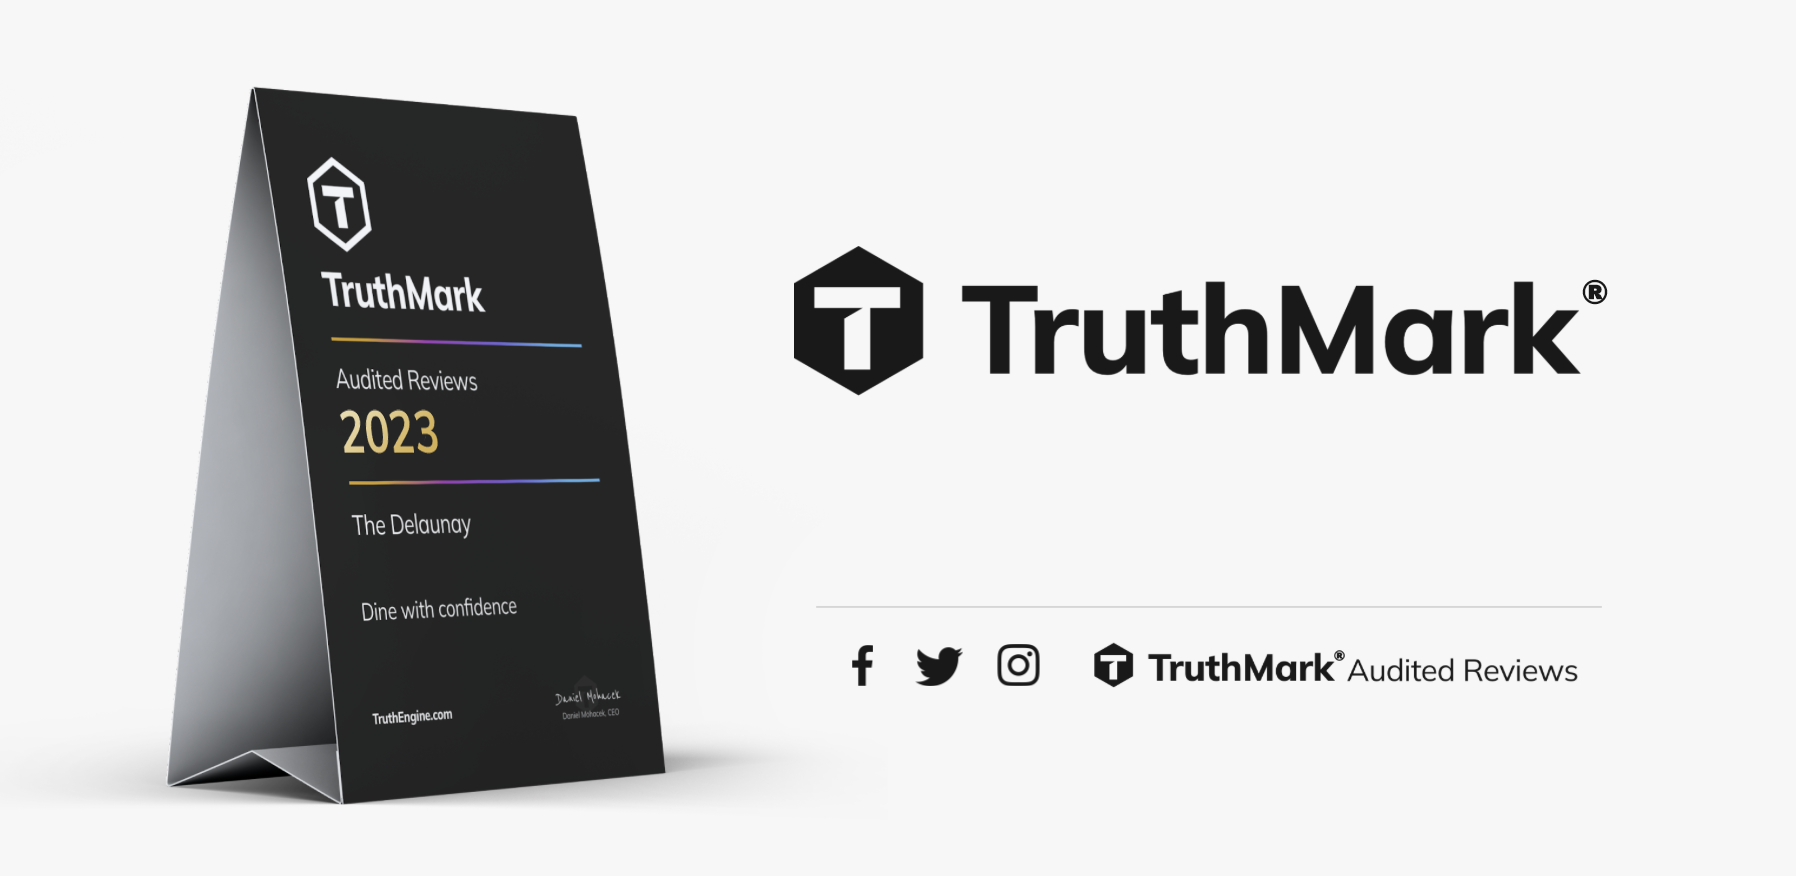 The Truthmark logo on a board, with social icons